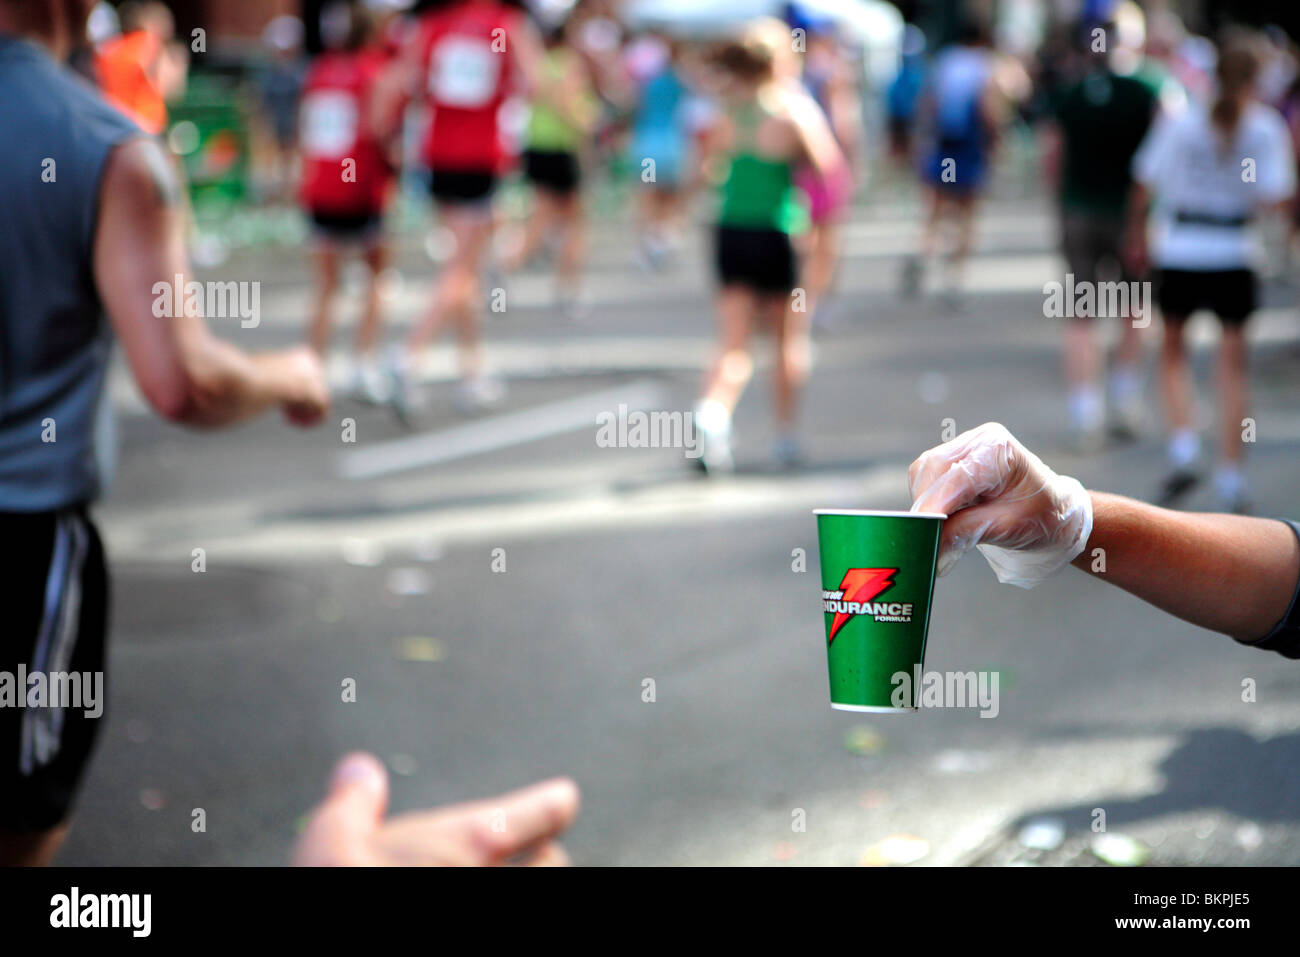 CHICAGO MARATHON ; ONE OF THE CHICAGO MARATHON STAFF MEMBERS HANDING A CUP OF ENERGY DRINK TO A RUNNER Stock Photo